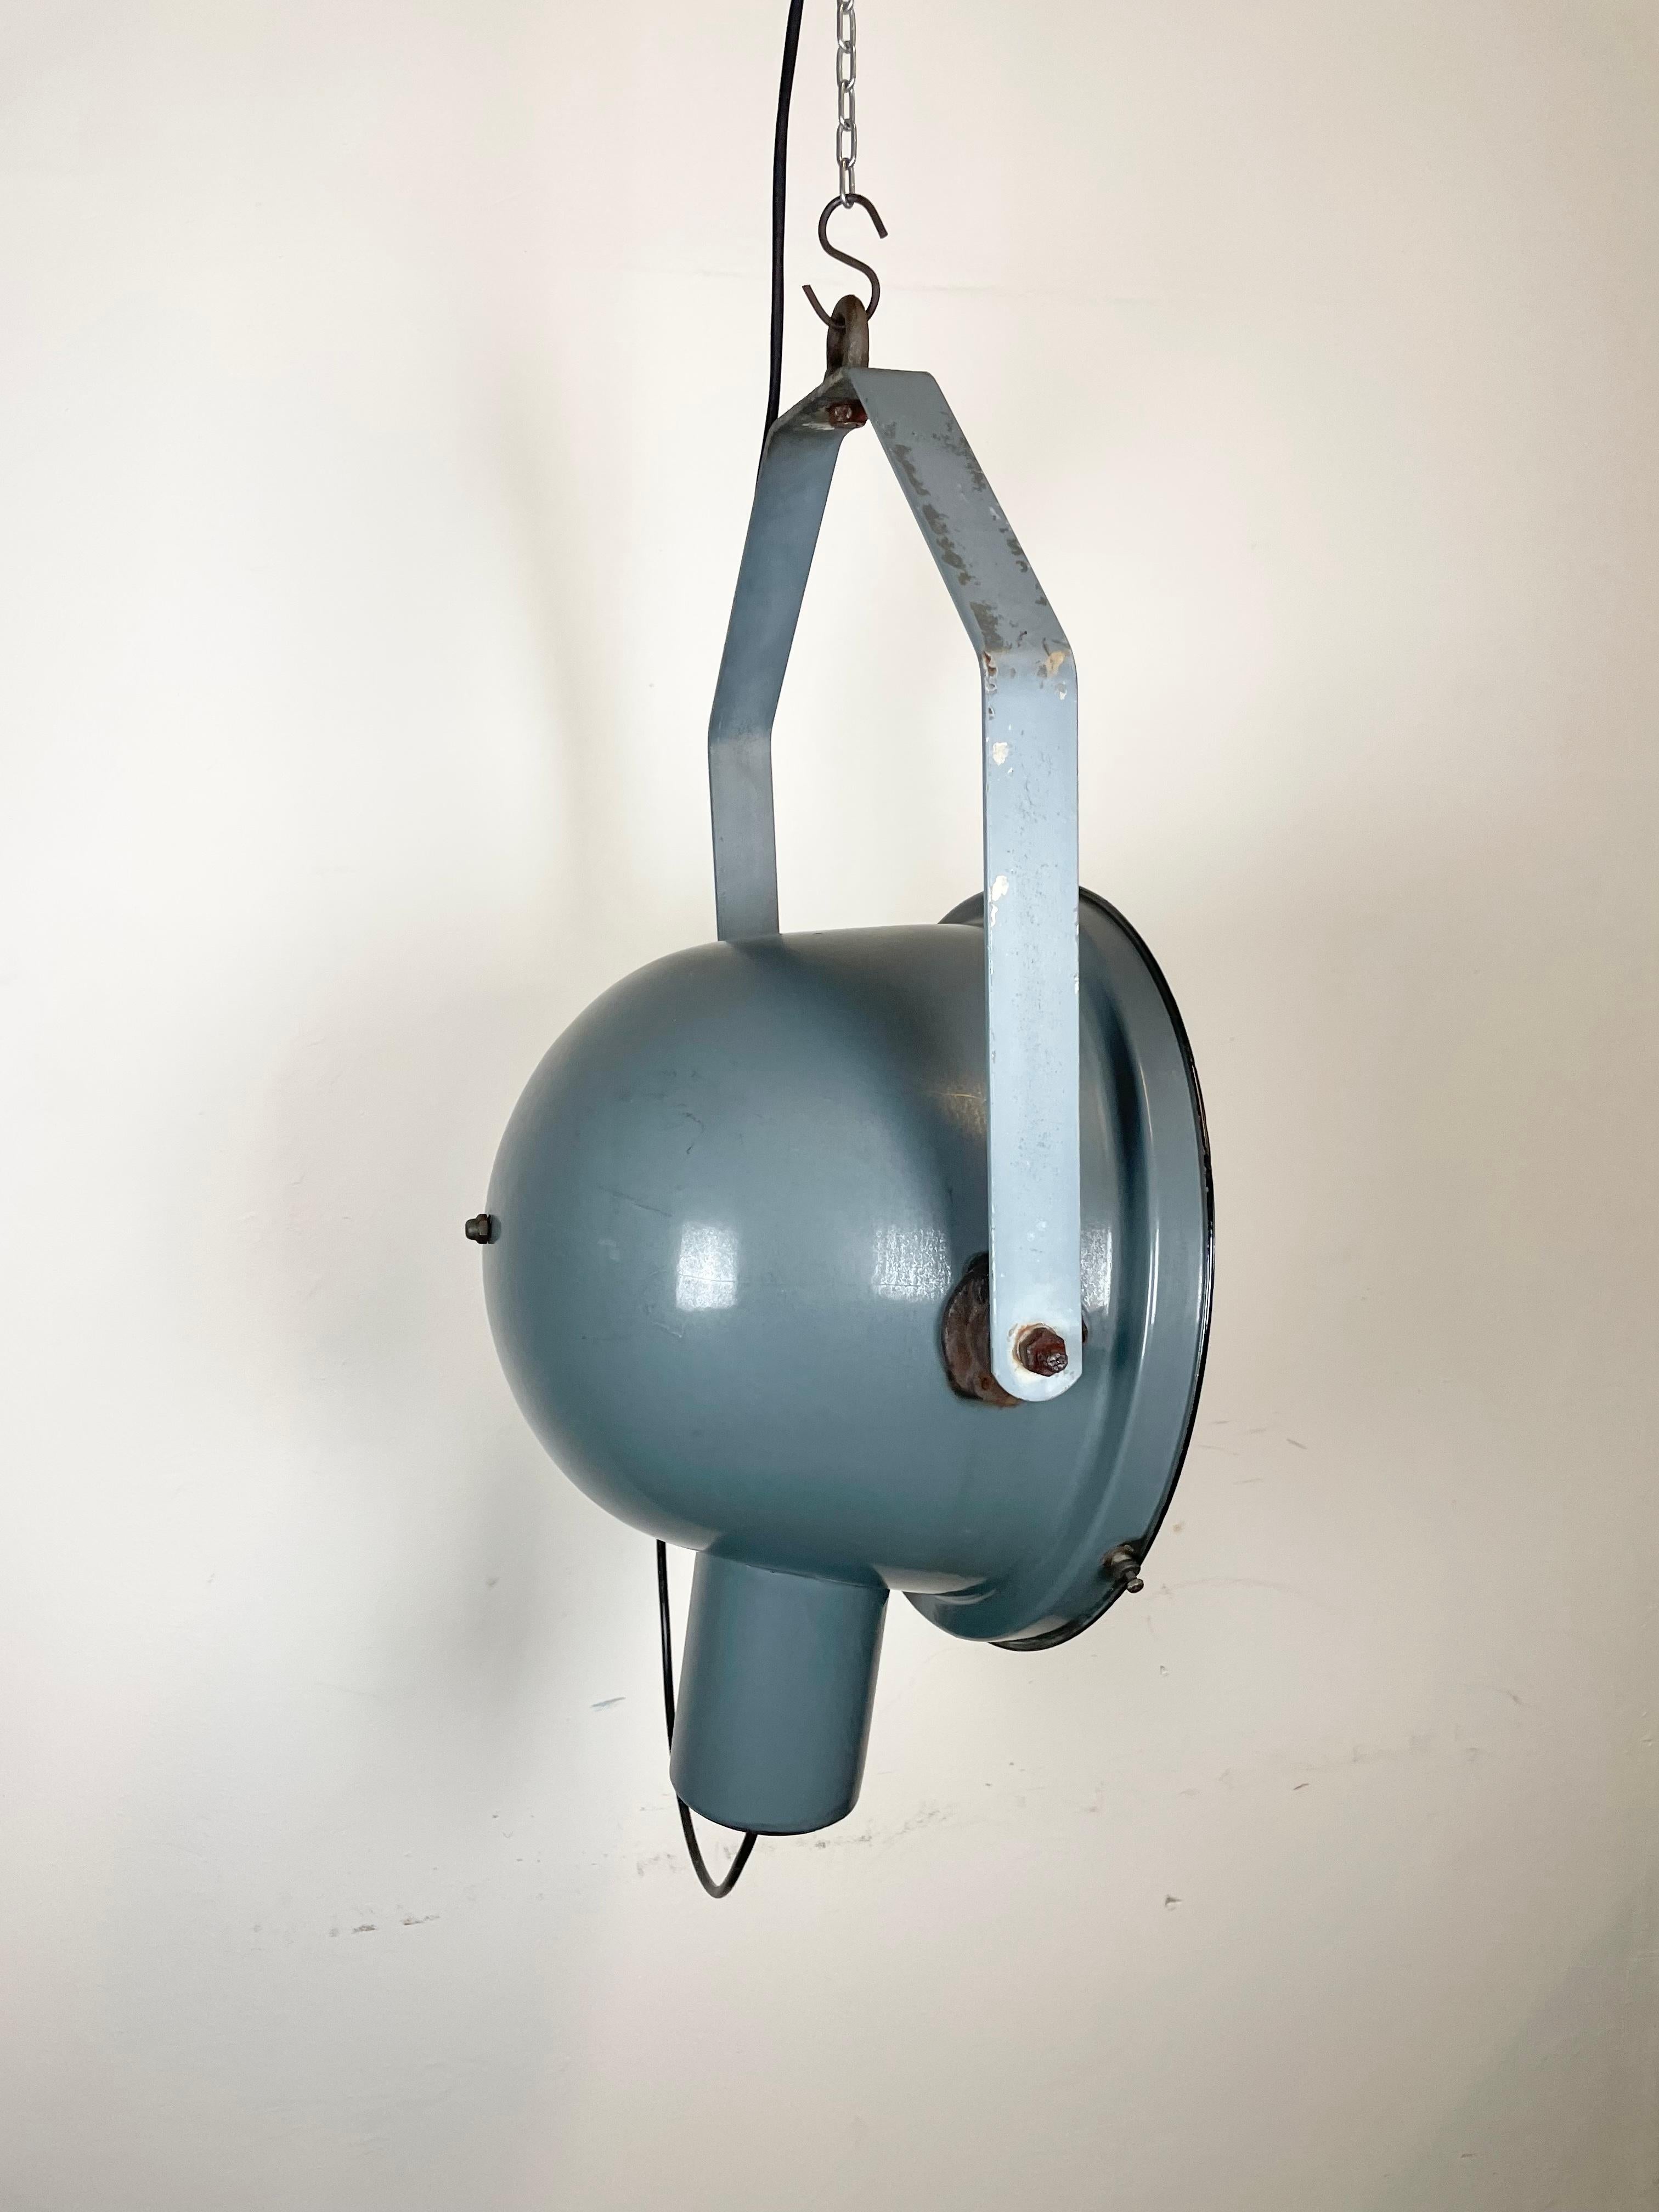 - Vintage factory spotlight made in former Czechoslovakia during the 1960s 
- It features a grey enamel body with white enamel interior and clear glass cover
- The porcelain socket requires E27/ E26 lightbulbs 
- New wire
-The height of the